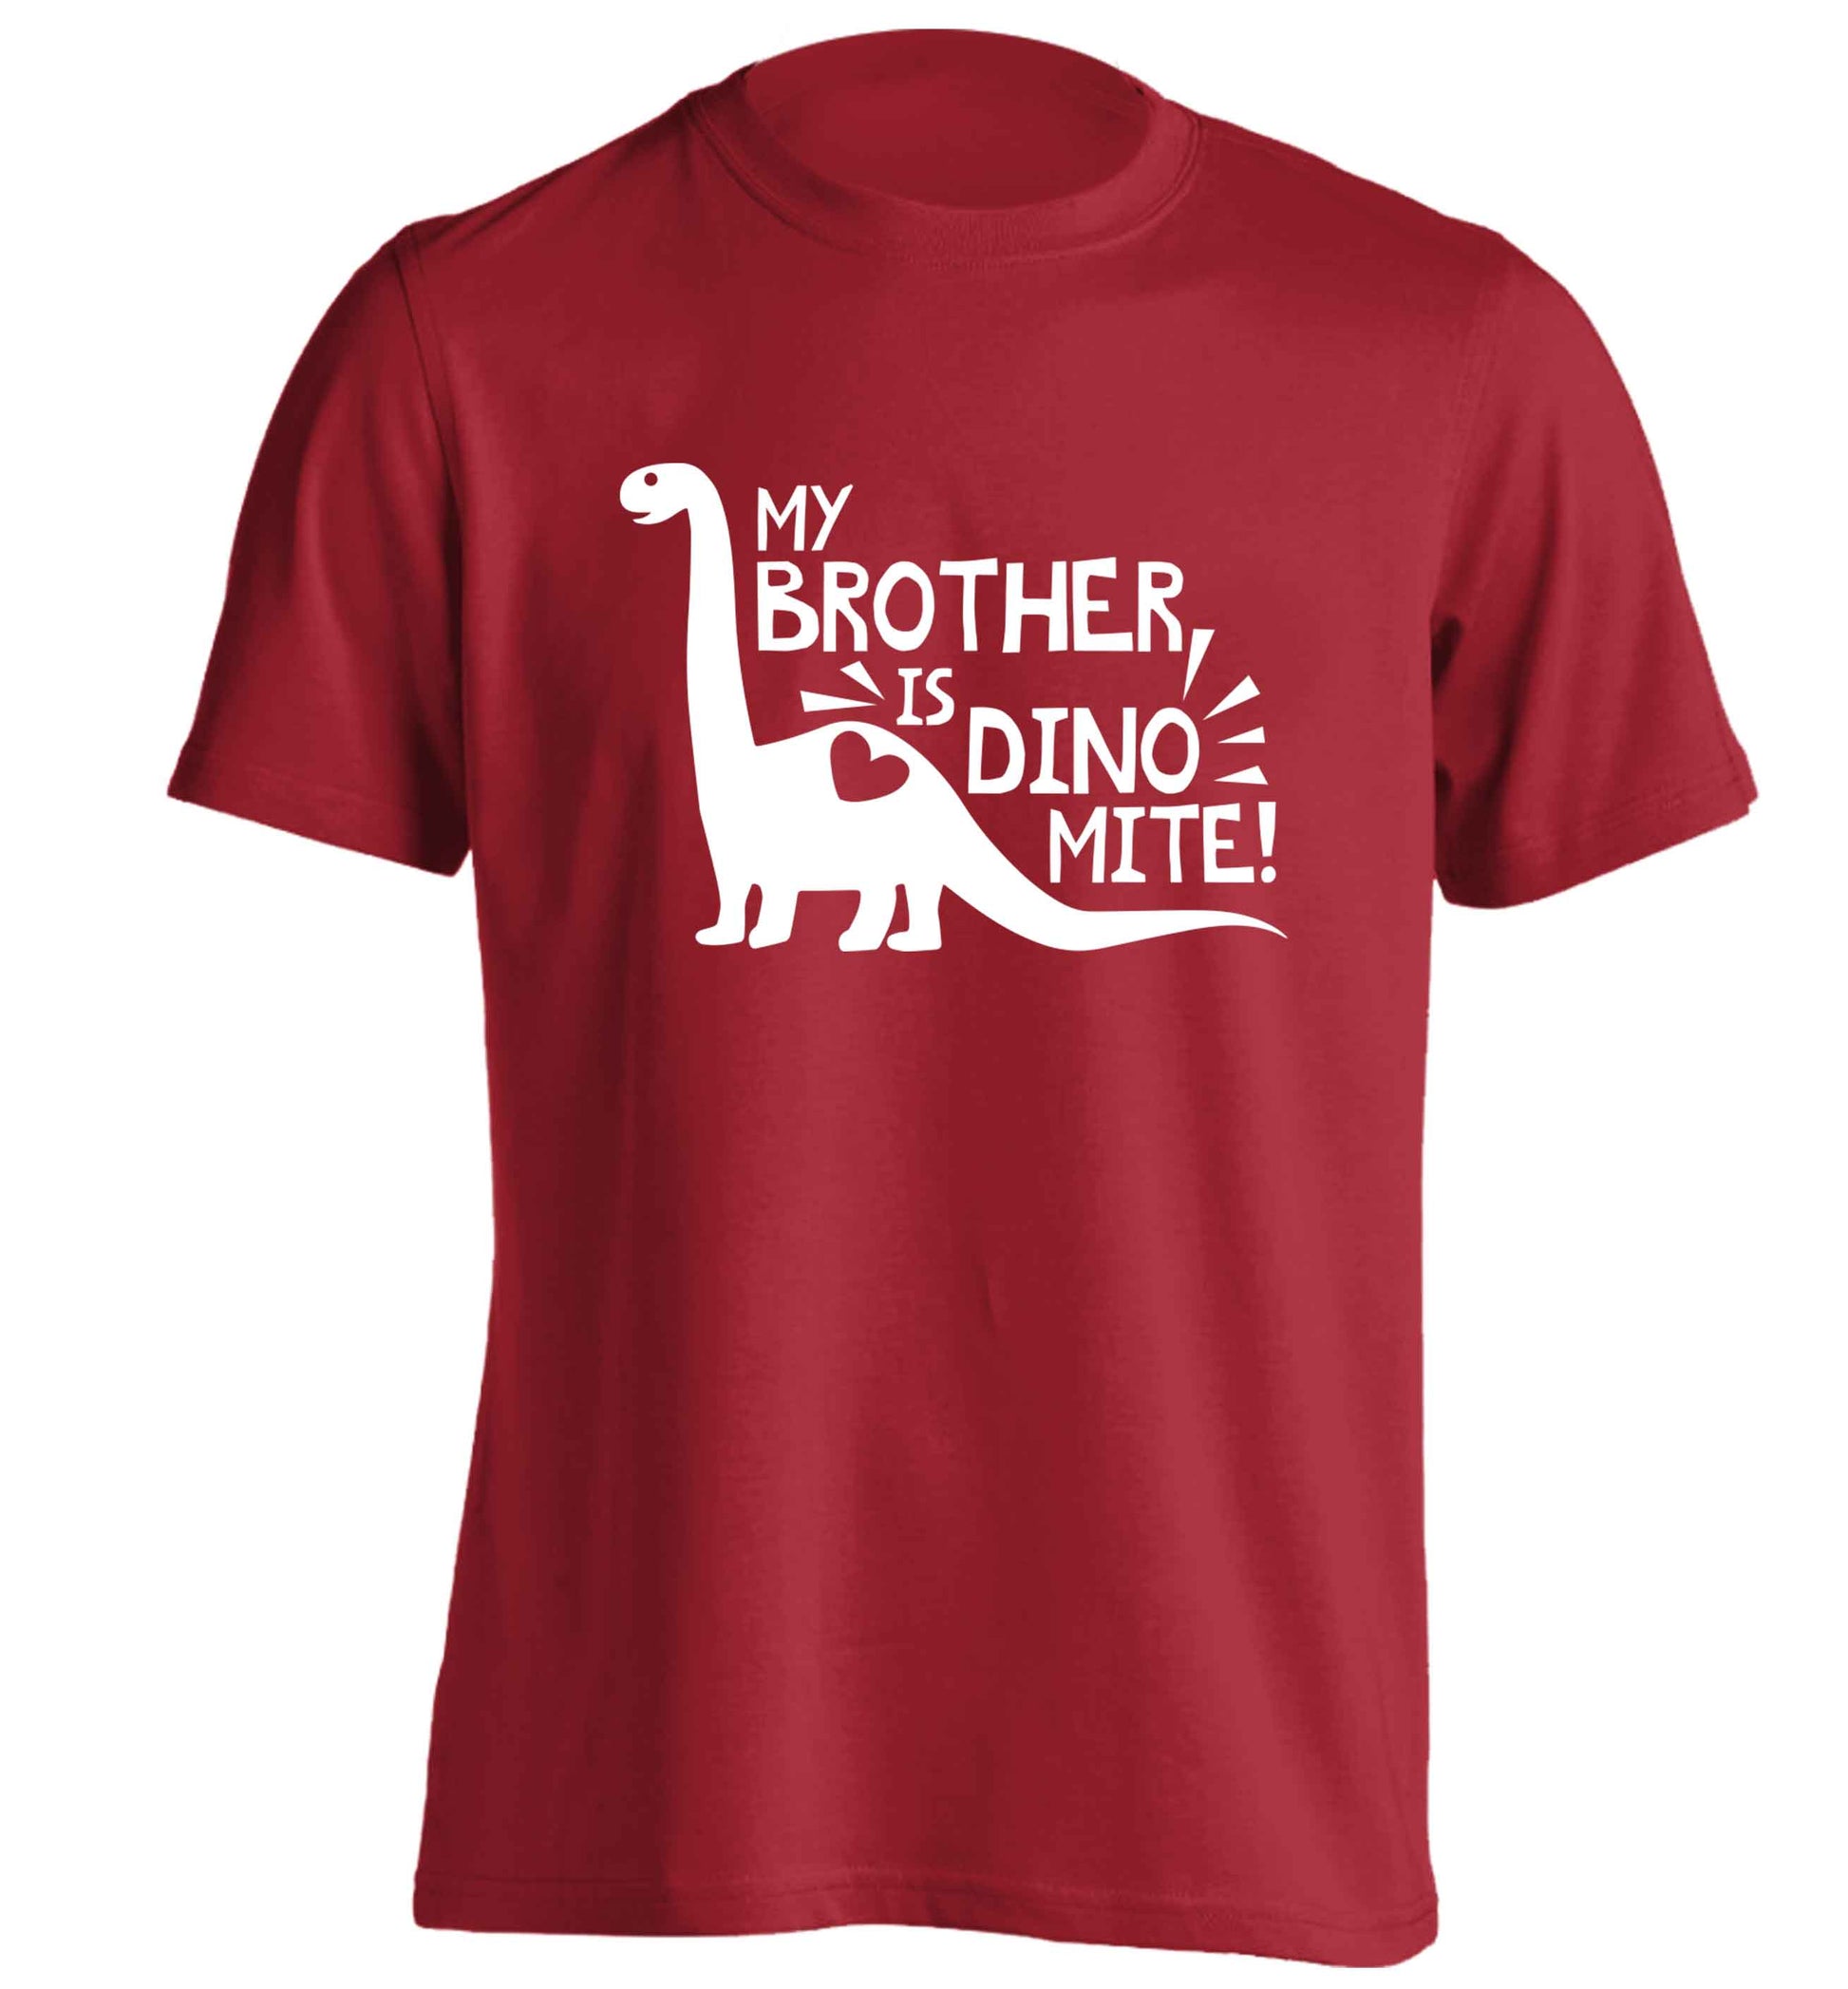 My brother is dinomite! adults unisex red Tshirt 2XL